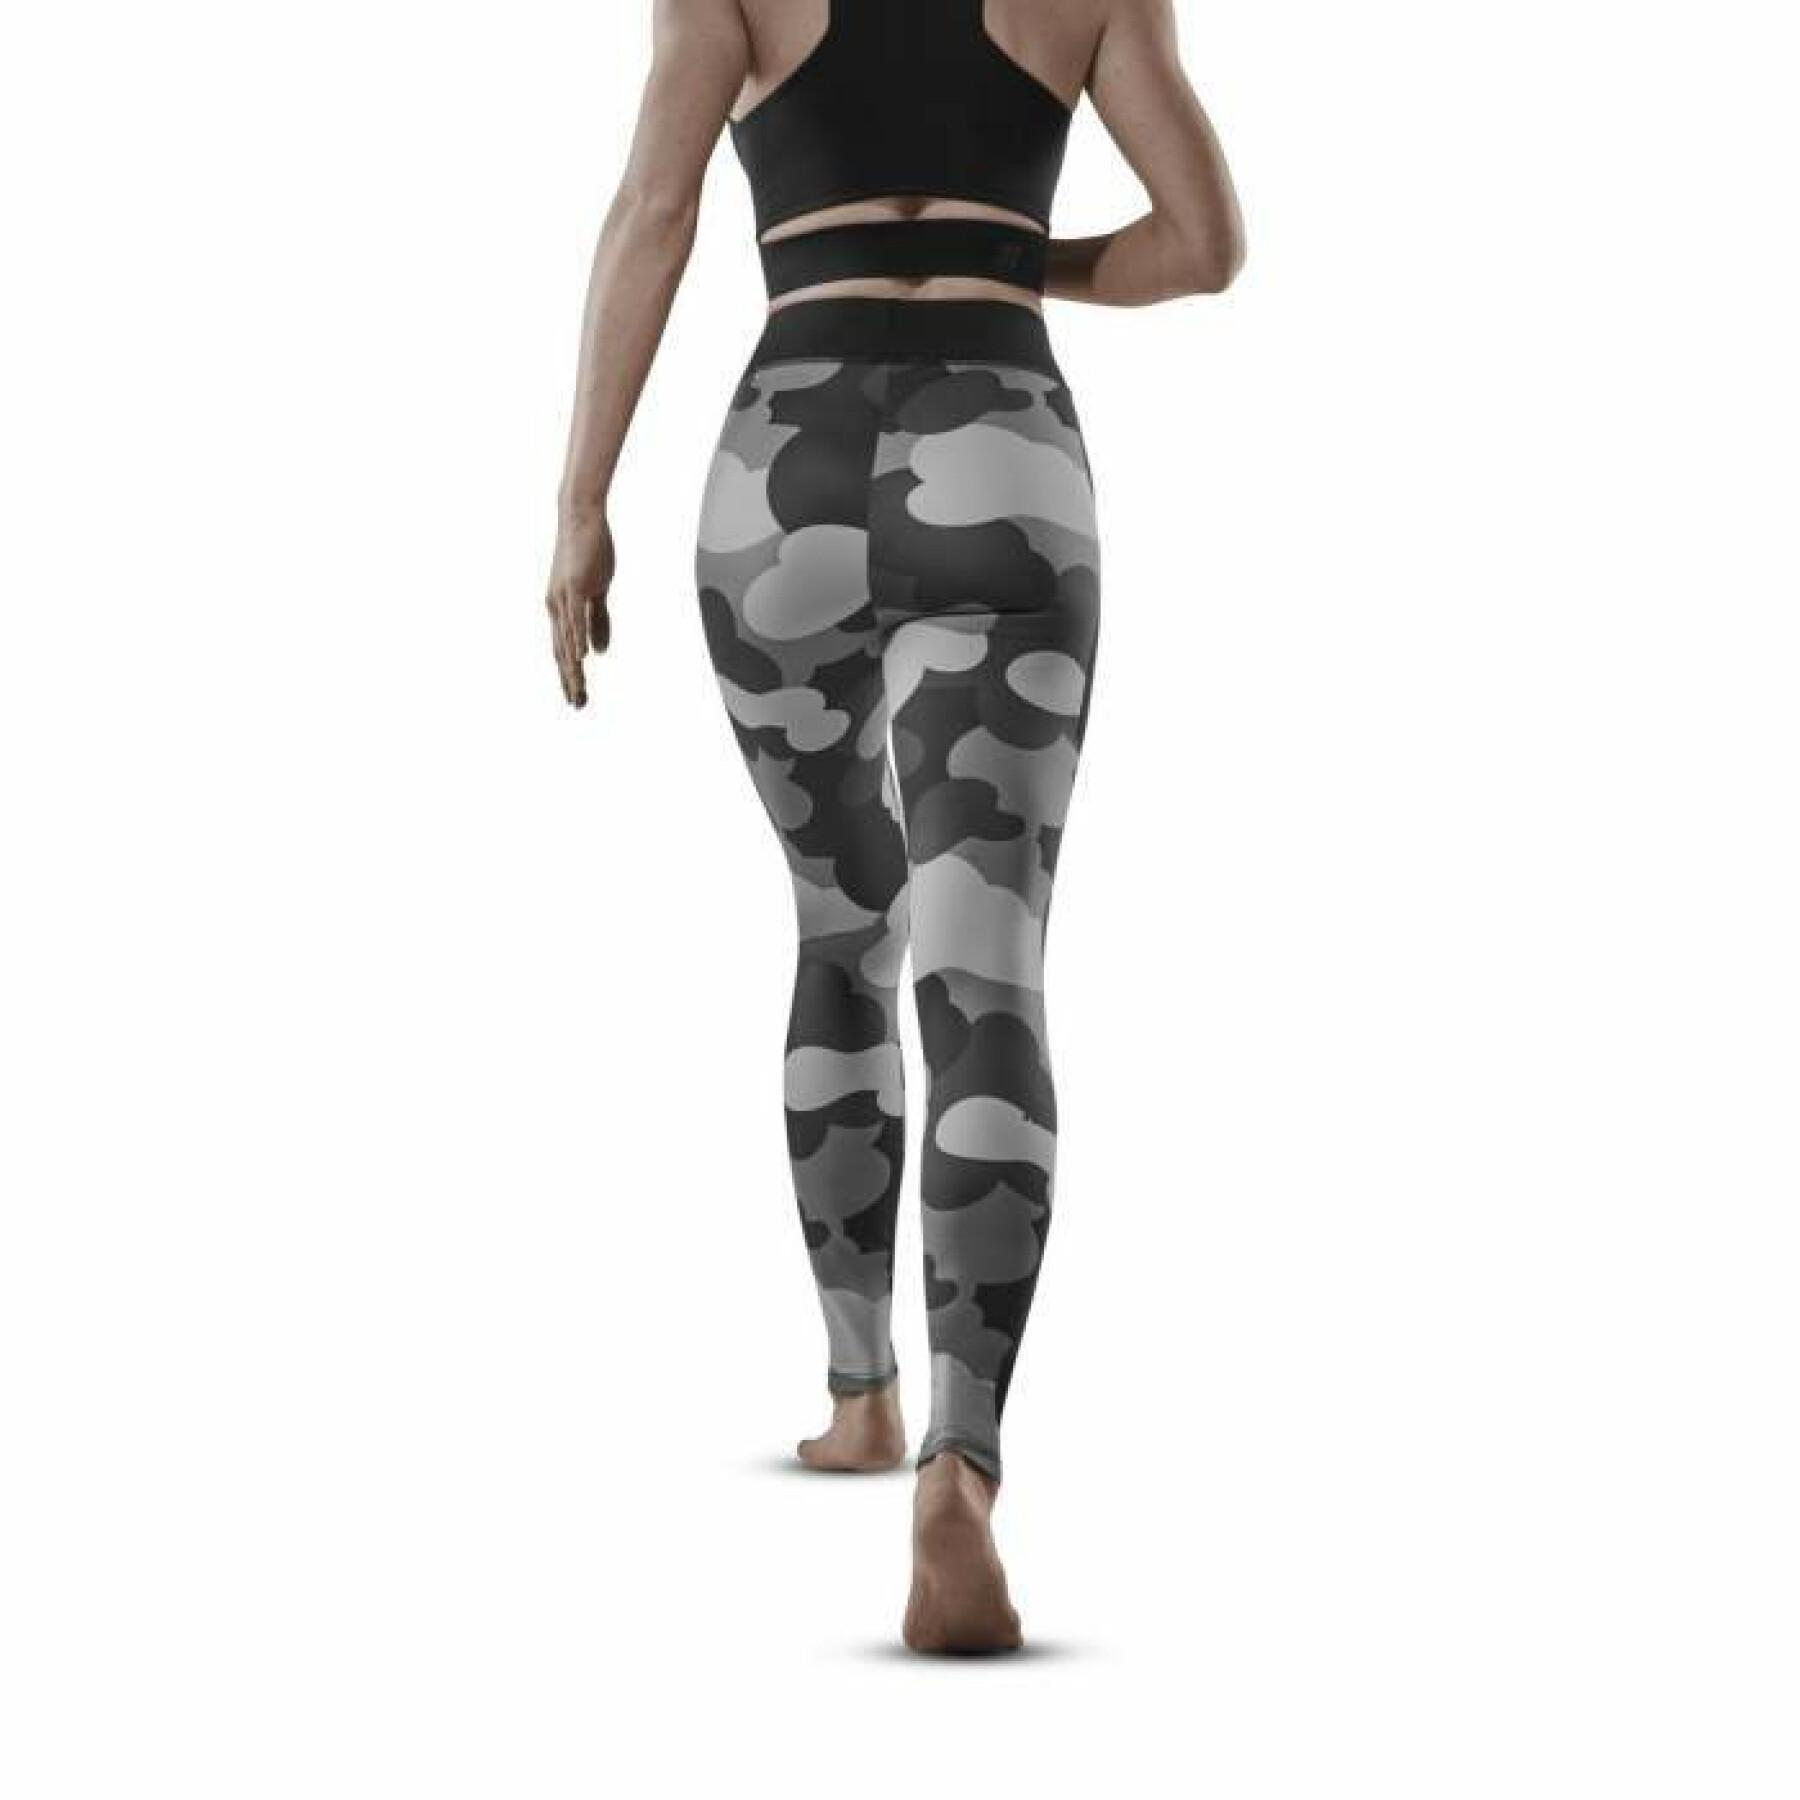 Legging woman CEP Compression Camocloud - Leggings / Tights - The